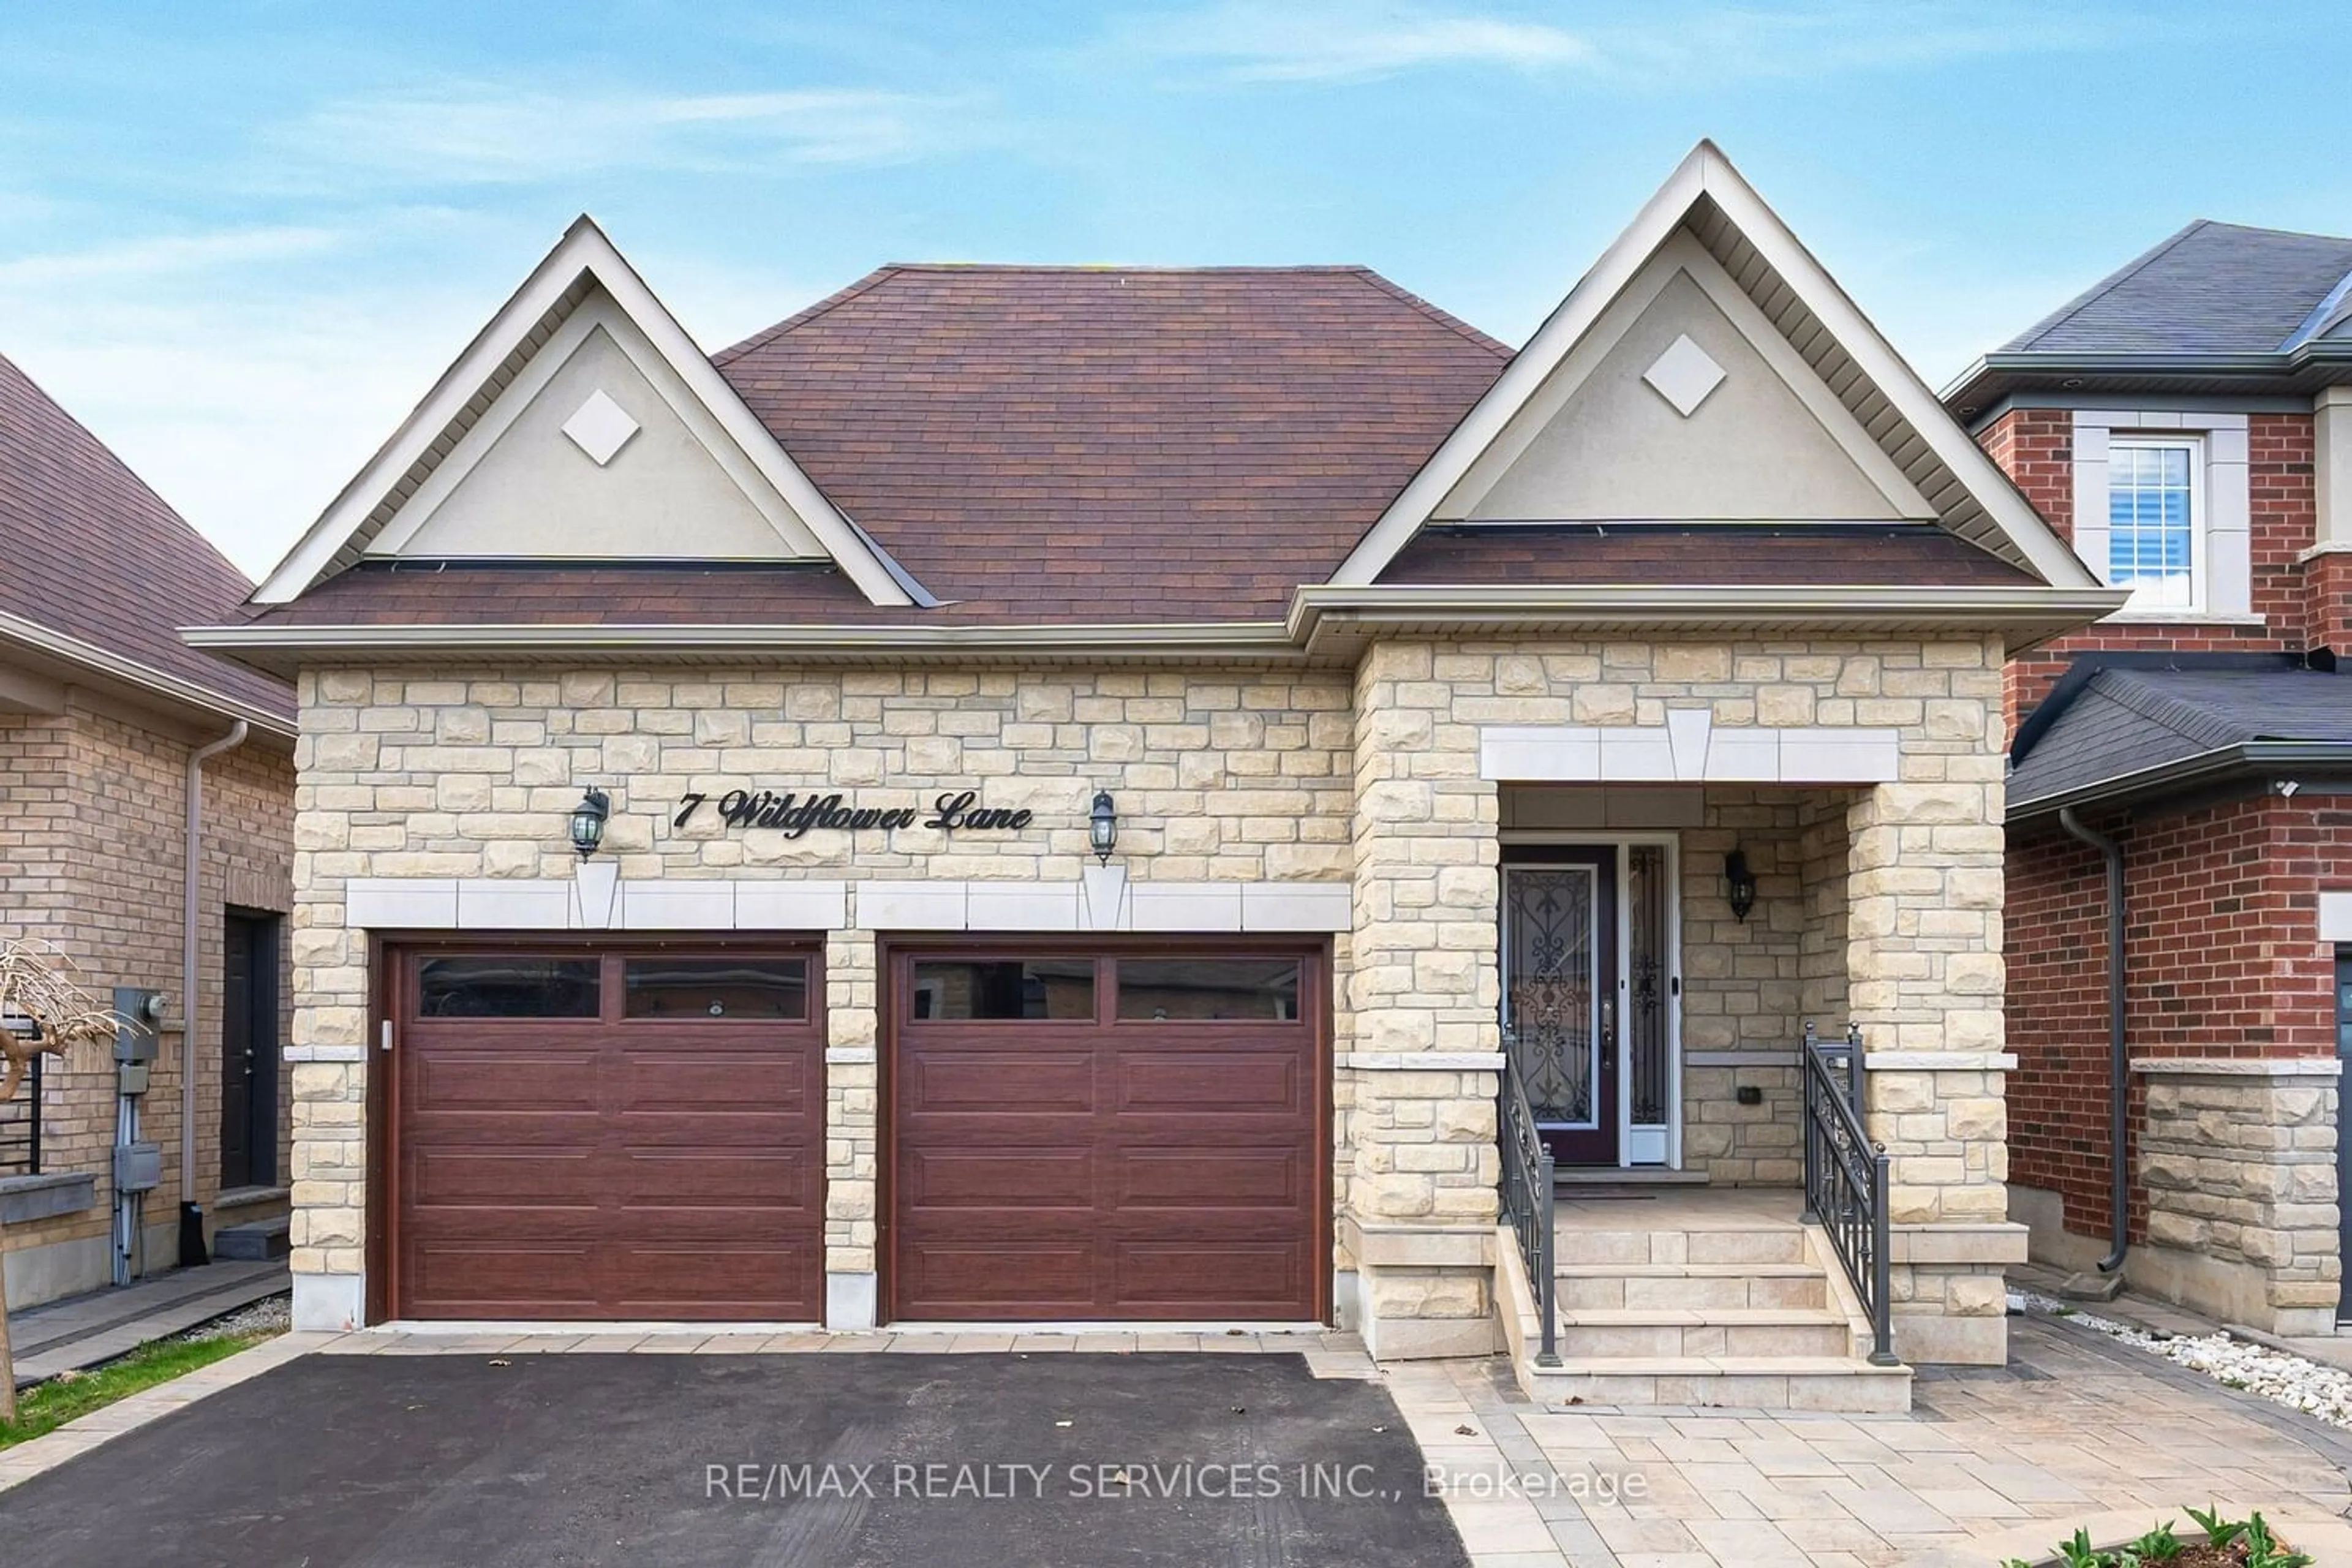 Home with brick exterior material for 7 Wildflower Lane, Halton Hills Ontario L7G 0H5